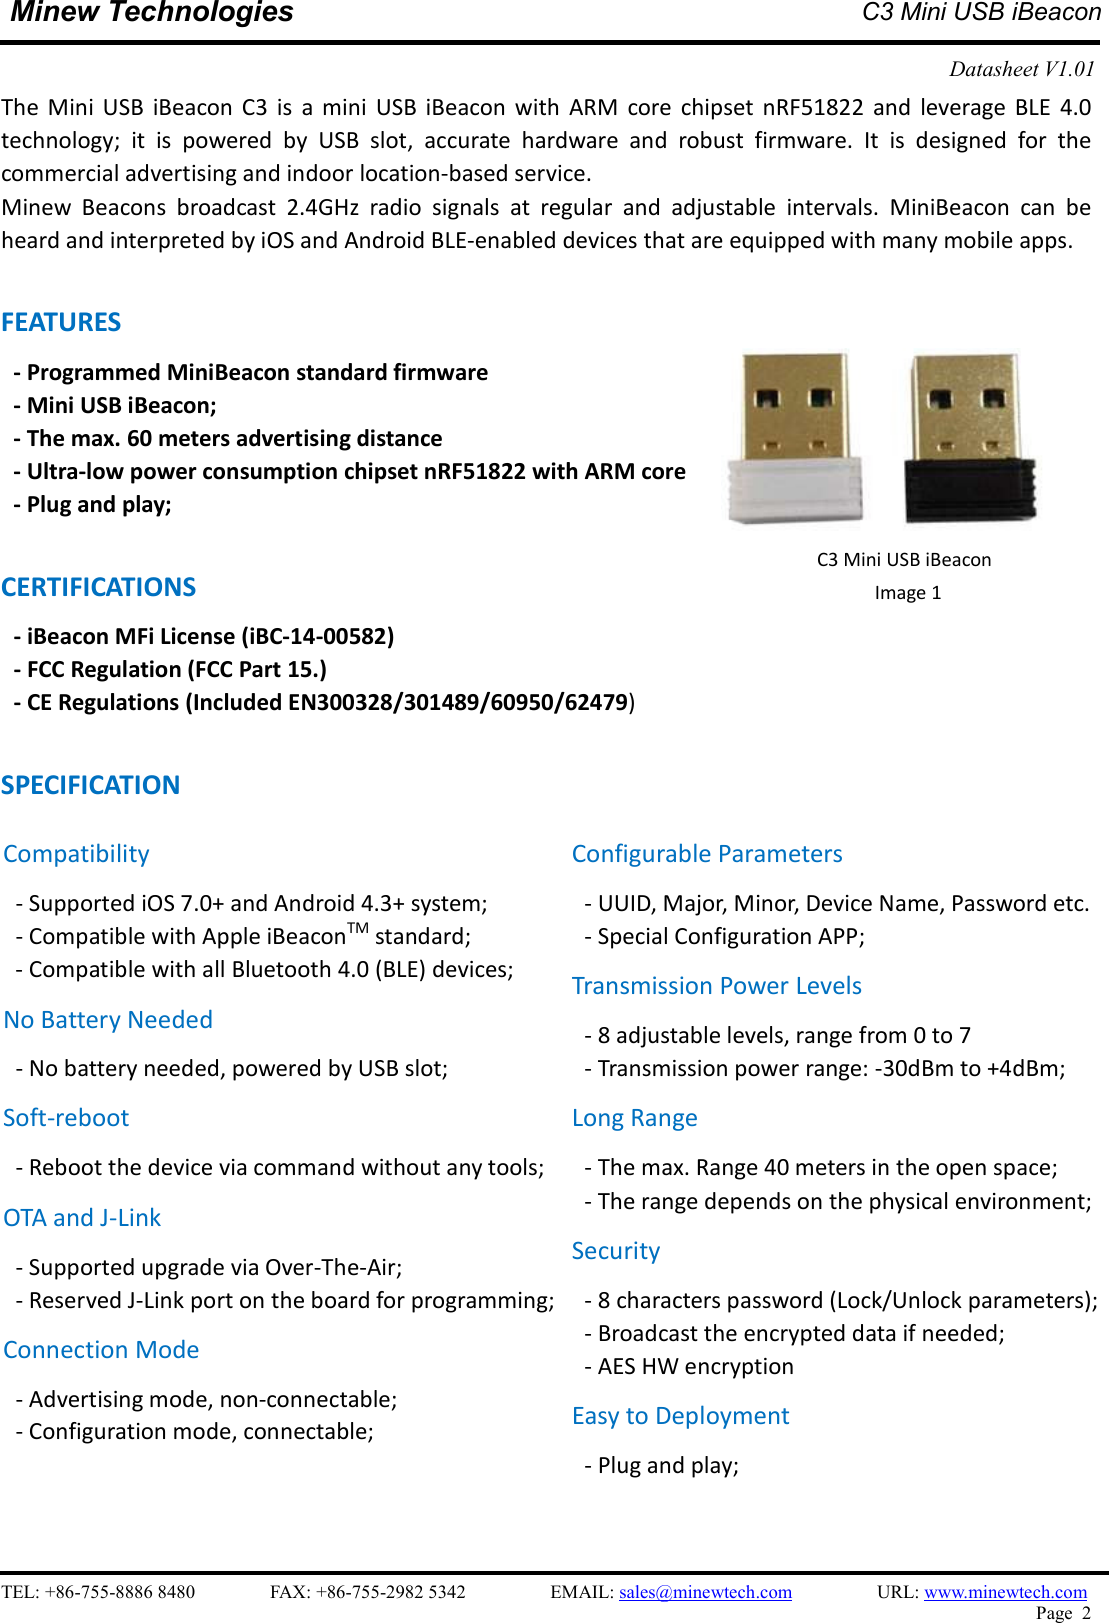    TEL: +86-755-8886 8480                FAX: +86-755-2982 5342                  EMAIL: sales@minewtech.com                  URL: www.minewtech.com Page  2  Minew Technologies  C3 Mini USB iBeacon  Datasheet V1.01    The  Mini  USB  iBeacon  C3  is  a  mini  USB  iBeacon  with  ARM  core  chipset  nRF51822  and  leverage  BLE  4.0 technology;  it  is  powered  by  USB  slot,  accurate  hardware  and  robust  firmware.  It  is  designed  for  the commercial advertising and indoor location-based service. Minew  Beacons  broadcast  2.4GHz  radio  signals  at  regular  and  adjustable  intervals.  MiniBeacon  can  be heard and interpreted by iOS and Android BLE-enabled devices that are equipped with many mobile apps.  FEATURES   - Programmed MiniBeacon standard firmware   - Mini USB iBeacon; - The max. 60 meters advertising distance - Ultra-low power consumption chipset nRF51822 with ARM core - Plug and play;  CERTIFICATIONS - iBeacon MFi License (iBC-14-00582)   - FCC Regulation (FCC Part 15.) - CE Regulations (Included EN300328/301489/60950/62479)  SPECIFICATION                          C3 Mini USB iBeacon Image 1   Compatibility - Supported iOS 7.0+ and Android 4.3+ system; - Compatible with Apple iBeaconTM standard;   - Compatible with all Bluetooth 4.0 (BLE) devices; No Battery Needed - No battery needed, powered by USB slot; Soft-reboot   - Reboot the device via command without any tools;   OTA and J-Link - Supported upgrade via Over-The-Air;   - Reserved J-Link port on the board for programming;  Connection Mode - Advertising mode, non-connectable;   - Configuration mode, connectable;   Configurable Parameters - UUID, Major, Minor, Device Name, Password etc. - Special Configuration APP; Transmission Power Levels - 8 adjustable levels, range from 0 to 7 - Transmission power range: -30dBm to +4dBm;   Long Range - The max. Range 40 meters in the open space;   - The range depends on the physical environment; Security - 8 characters password (Lock/Unlock parameters);   - Broadcast the encrypted data if needed; - AES HW encryption Easy to Deployment - Plug and play;    